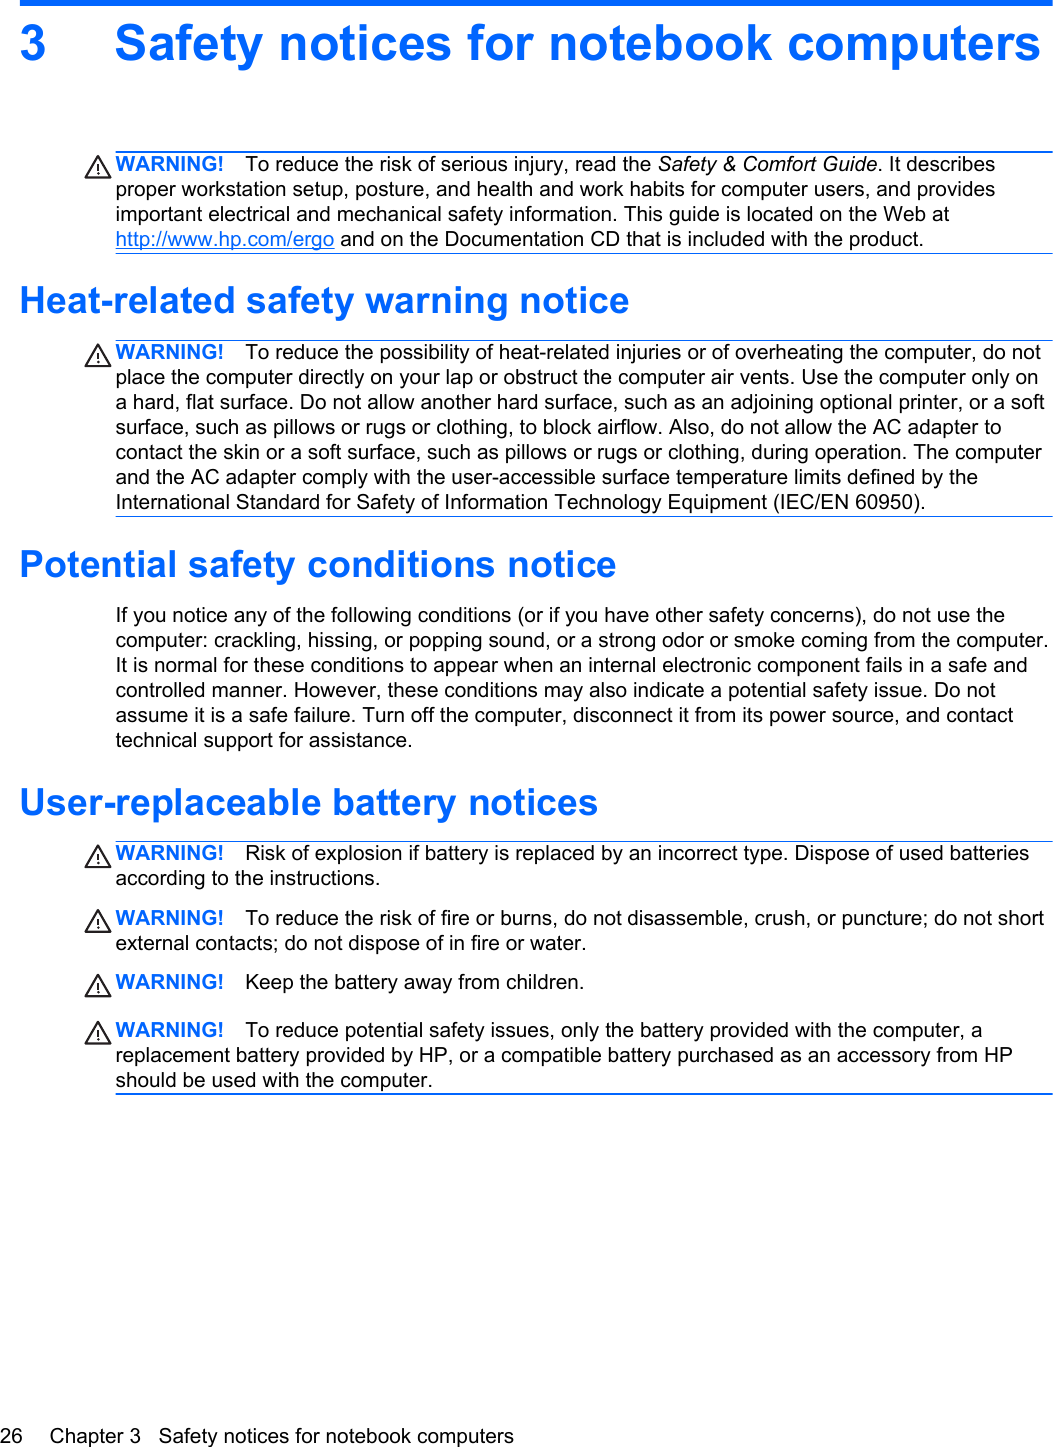 3 Safety notices for notebook computersWARNING! To reduce the risk of serious injury, read the Safety &amp; Comfort Guide. It describesproper workstation setup, posture, and health and work habits for computer users, and providesimportant electrical and mechanical safety information. This guide is located on the Web athttp://www.hp.com/ergo and on the Documentation CD that is included with the product.Heat-related safety warning noticeWARNING! To reduce the possibility of heat-related injuries or of overheating the computer, do notplace the computer directly on your lap or obstruct the computer air vents. Use the computer only ona hard, flat surface. Do not allow another hard surface, such as an adjoining optional printer, or a softsurface, such as pillows or rugs or clothing, to block airflow. Also, do not allow the AC adapter tocontact the skin or a soft surface, such as pillows or rugs or clothing, during operation. The computerand the AC adapter comply with the user-accessible surface temperature limits defined by theInternational Standard for Safety of Information Technology Equipment (IEC/EN 60950).Potential safety conditions noticeIf you notice any of the following conditions (or if you have other safety concerns), do not use thecomputer: crackling, hissing, or popping sound, or a strong odor or smoke coming from the computer.It is normal for these conditions to appear when an internal electronic component fails in a safe andcontrolled manner. However, these conditions may also indicate a potential safety issue. Do notassume it is a safe failure. Turn off the computer, disconnect it from its power source, and contacttechnical support for assistance.User-replaceable battery noticesWARNING! Risk of explosion if battery is replaced by an incorrect type. Dispose of used batteriesaccording to the instructions.WARNING! To reduce the risk of fire or burns, do not disassemble, crush, or puncture; do not shortexternal contacts; do not dispose of in fire or water.WARNING! Keep the battery away from children.WARNING! To reduce potential safety issues, only the battery provided with the computer, areplacement battery provided by HP, or a compatible battery purchased as an accessory from HPshould be used with the computer.26 Chapter 3   Safety notices for notebook computers